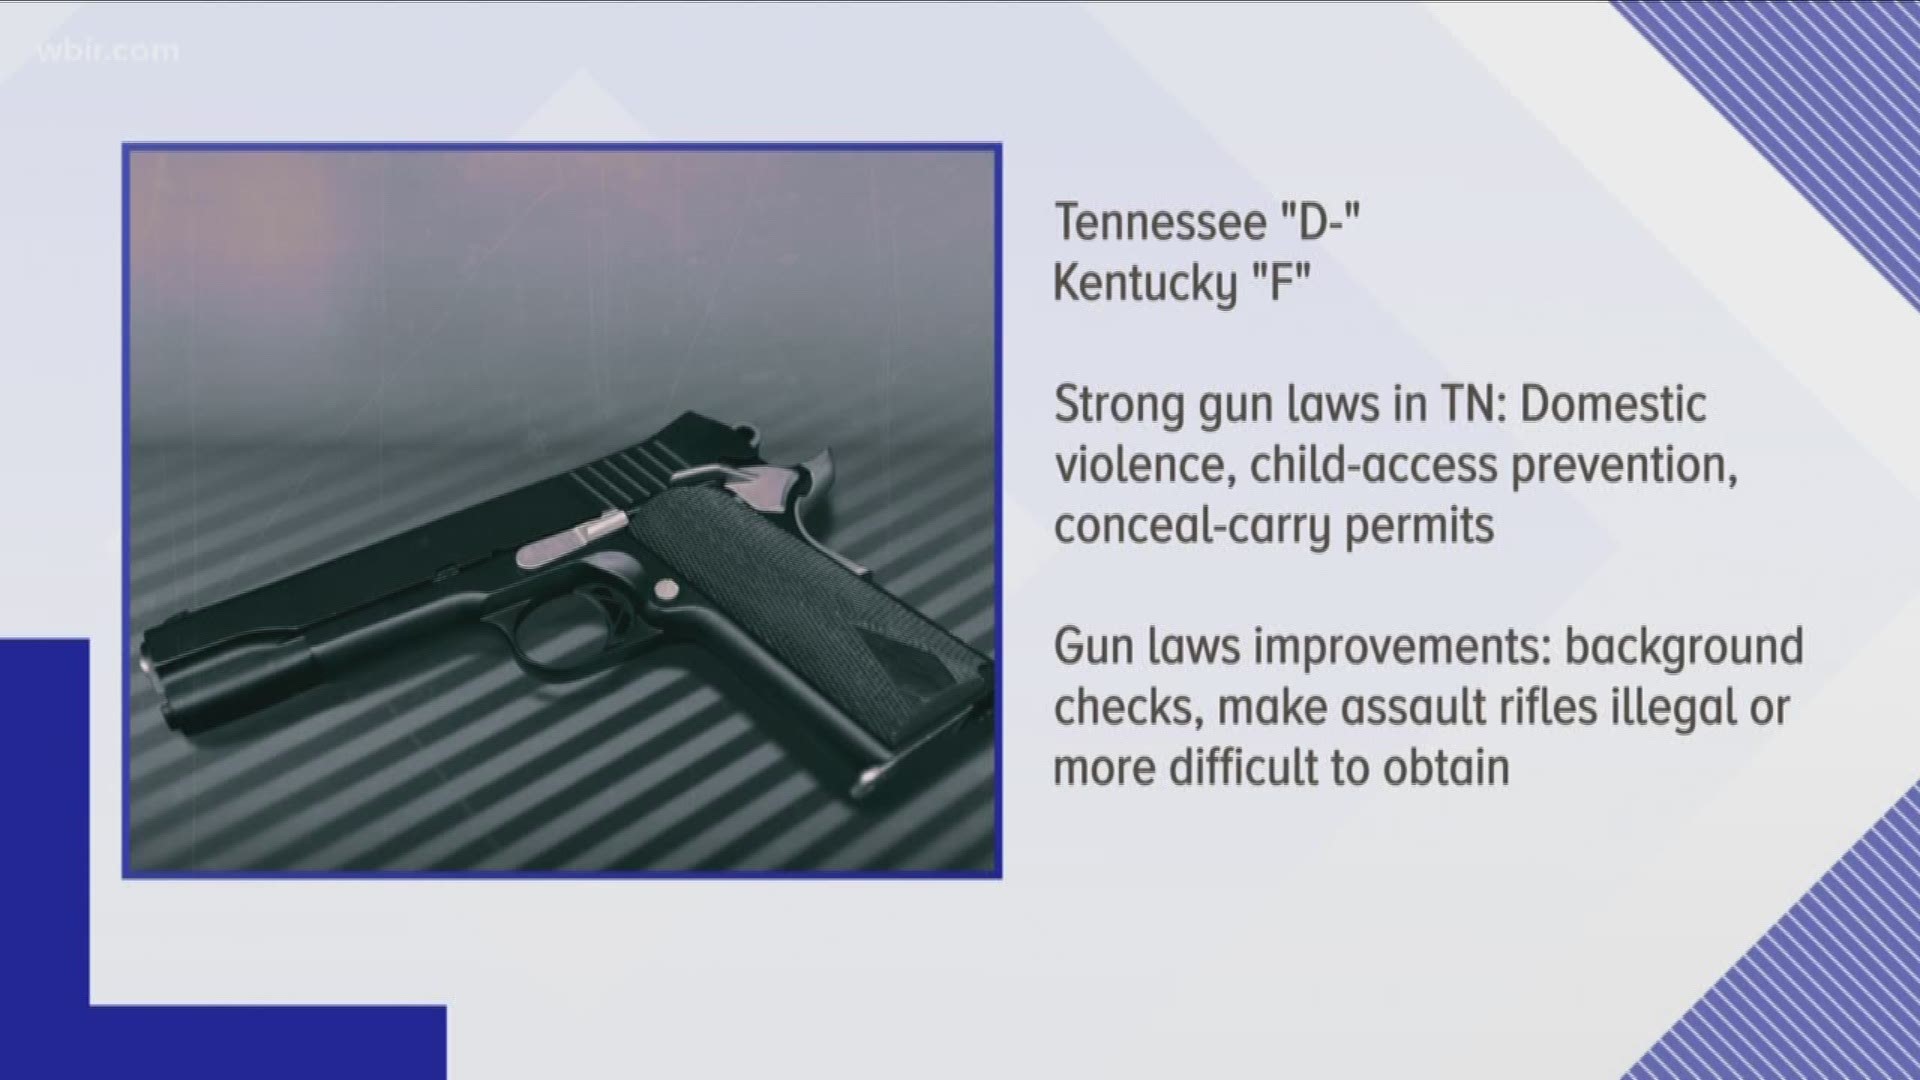 A new study from the Gabrielle Giffords' Law Center says Tennessee received a "D-" in gun laws.